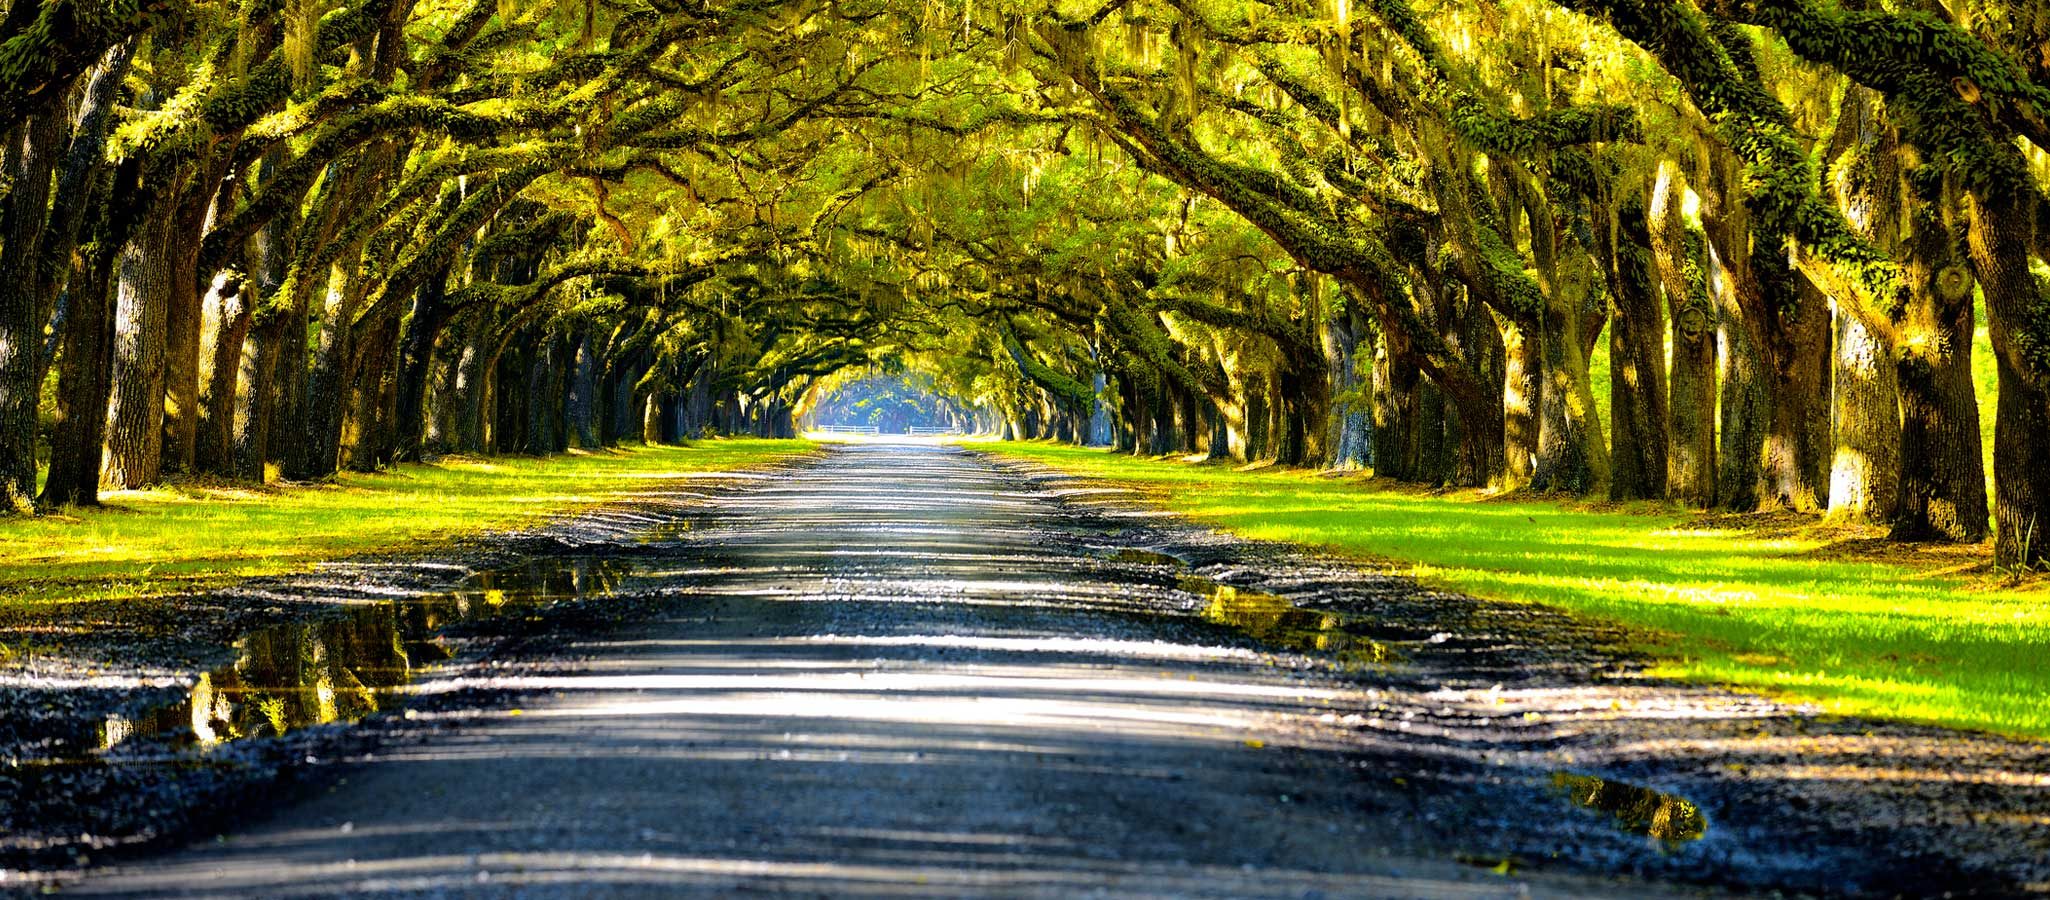 A tree lined road 